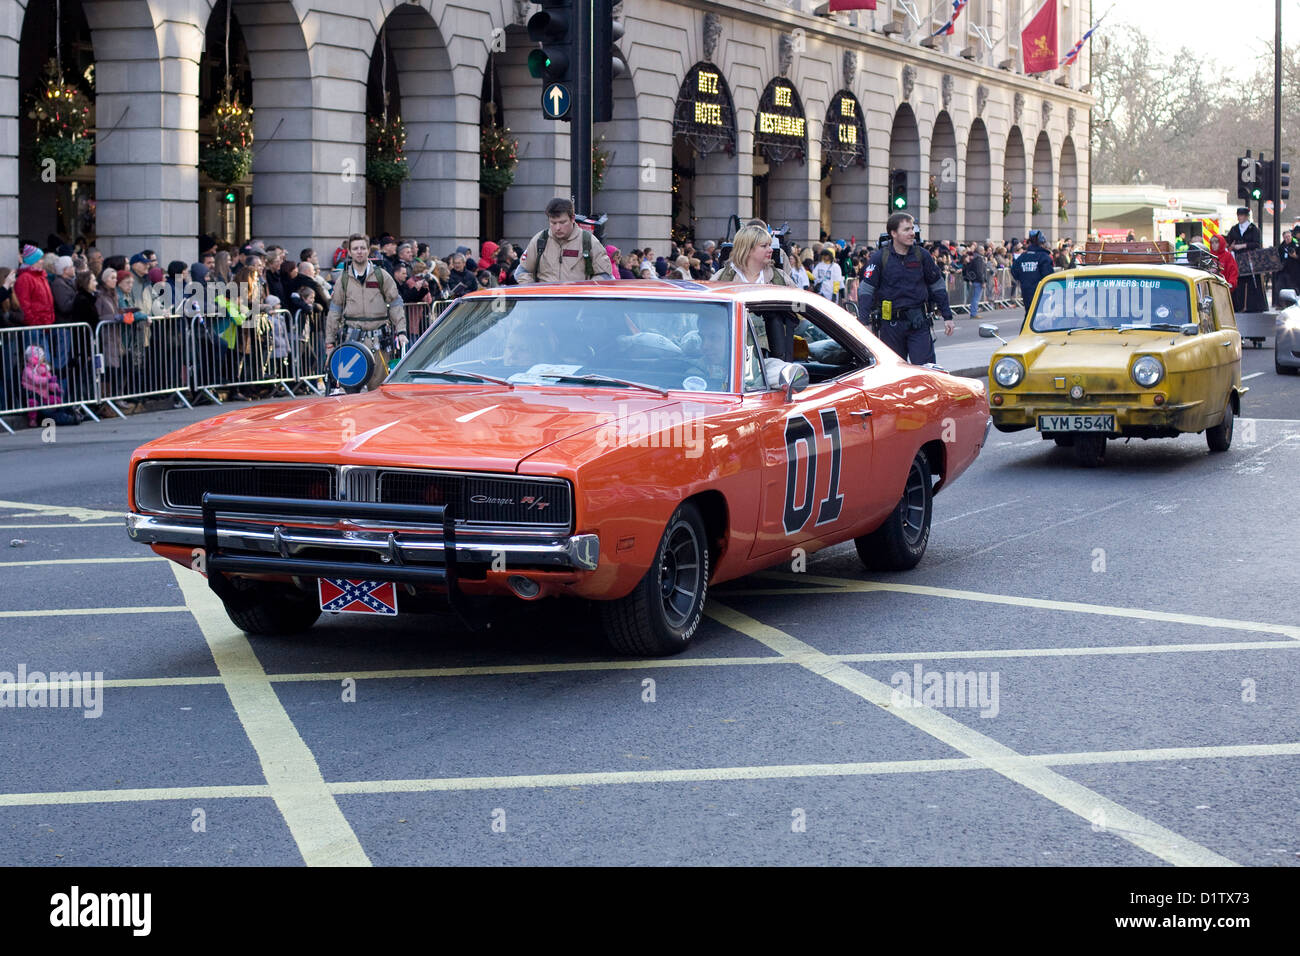 The General Lee And Trotters Independent Trading Car from Dukes of Hazard and Only fools and Horses in London Parade Stock Photo